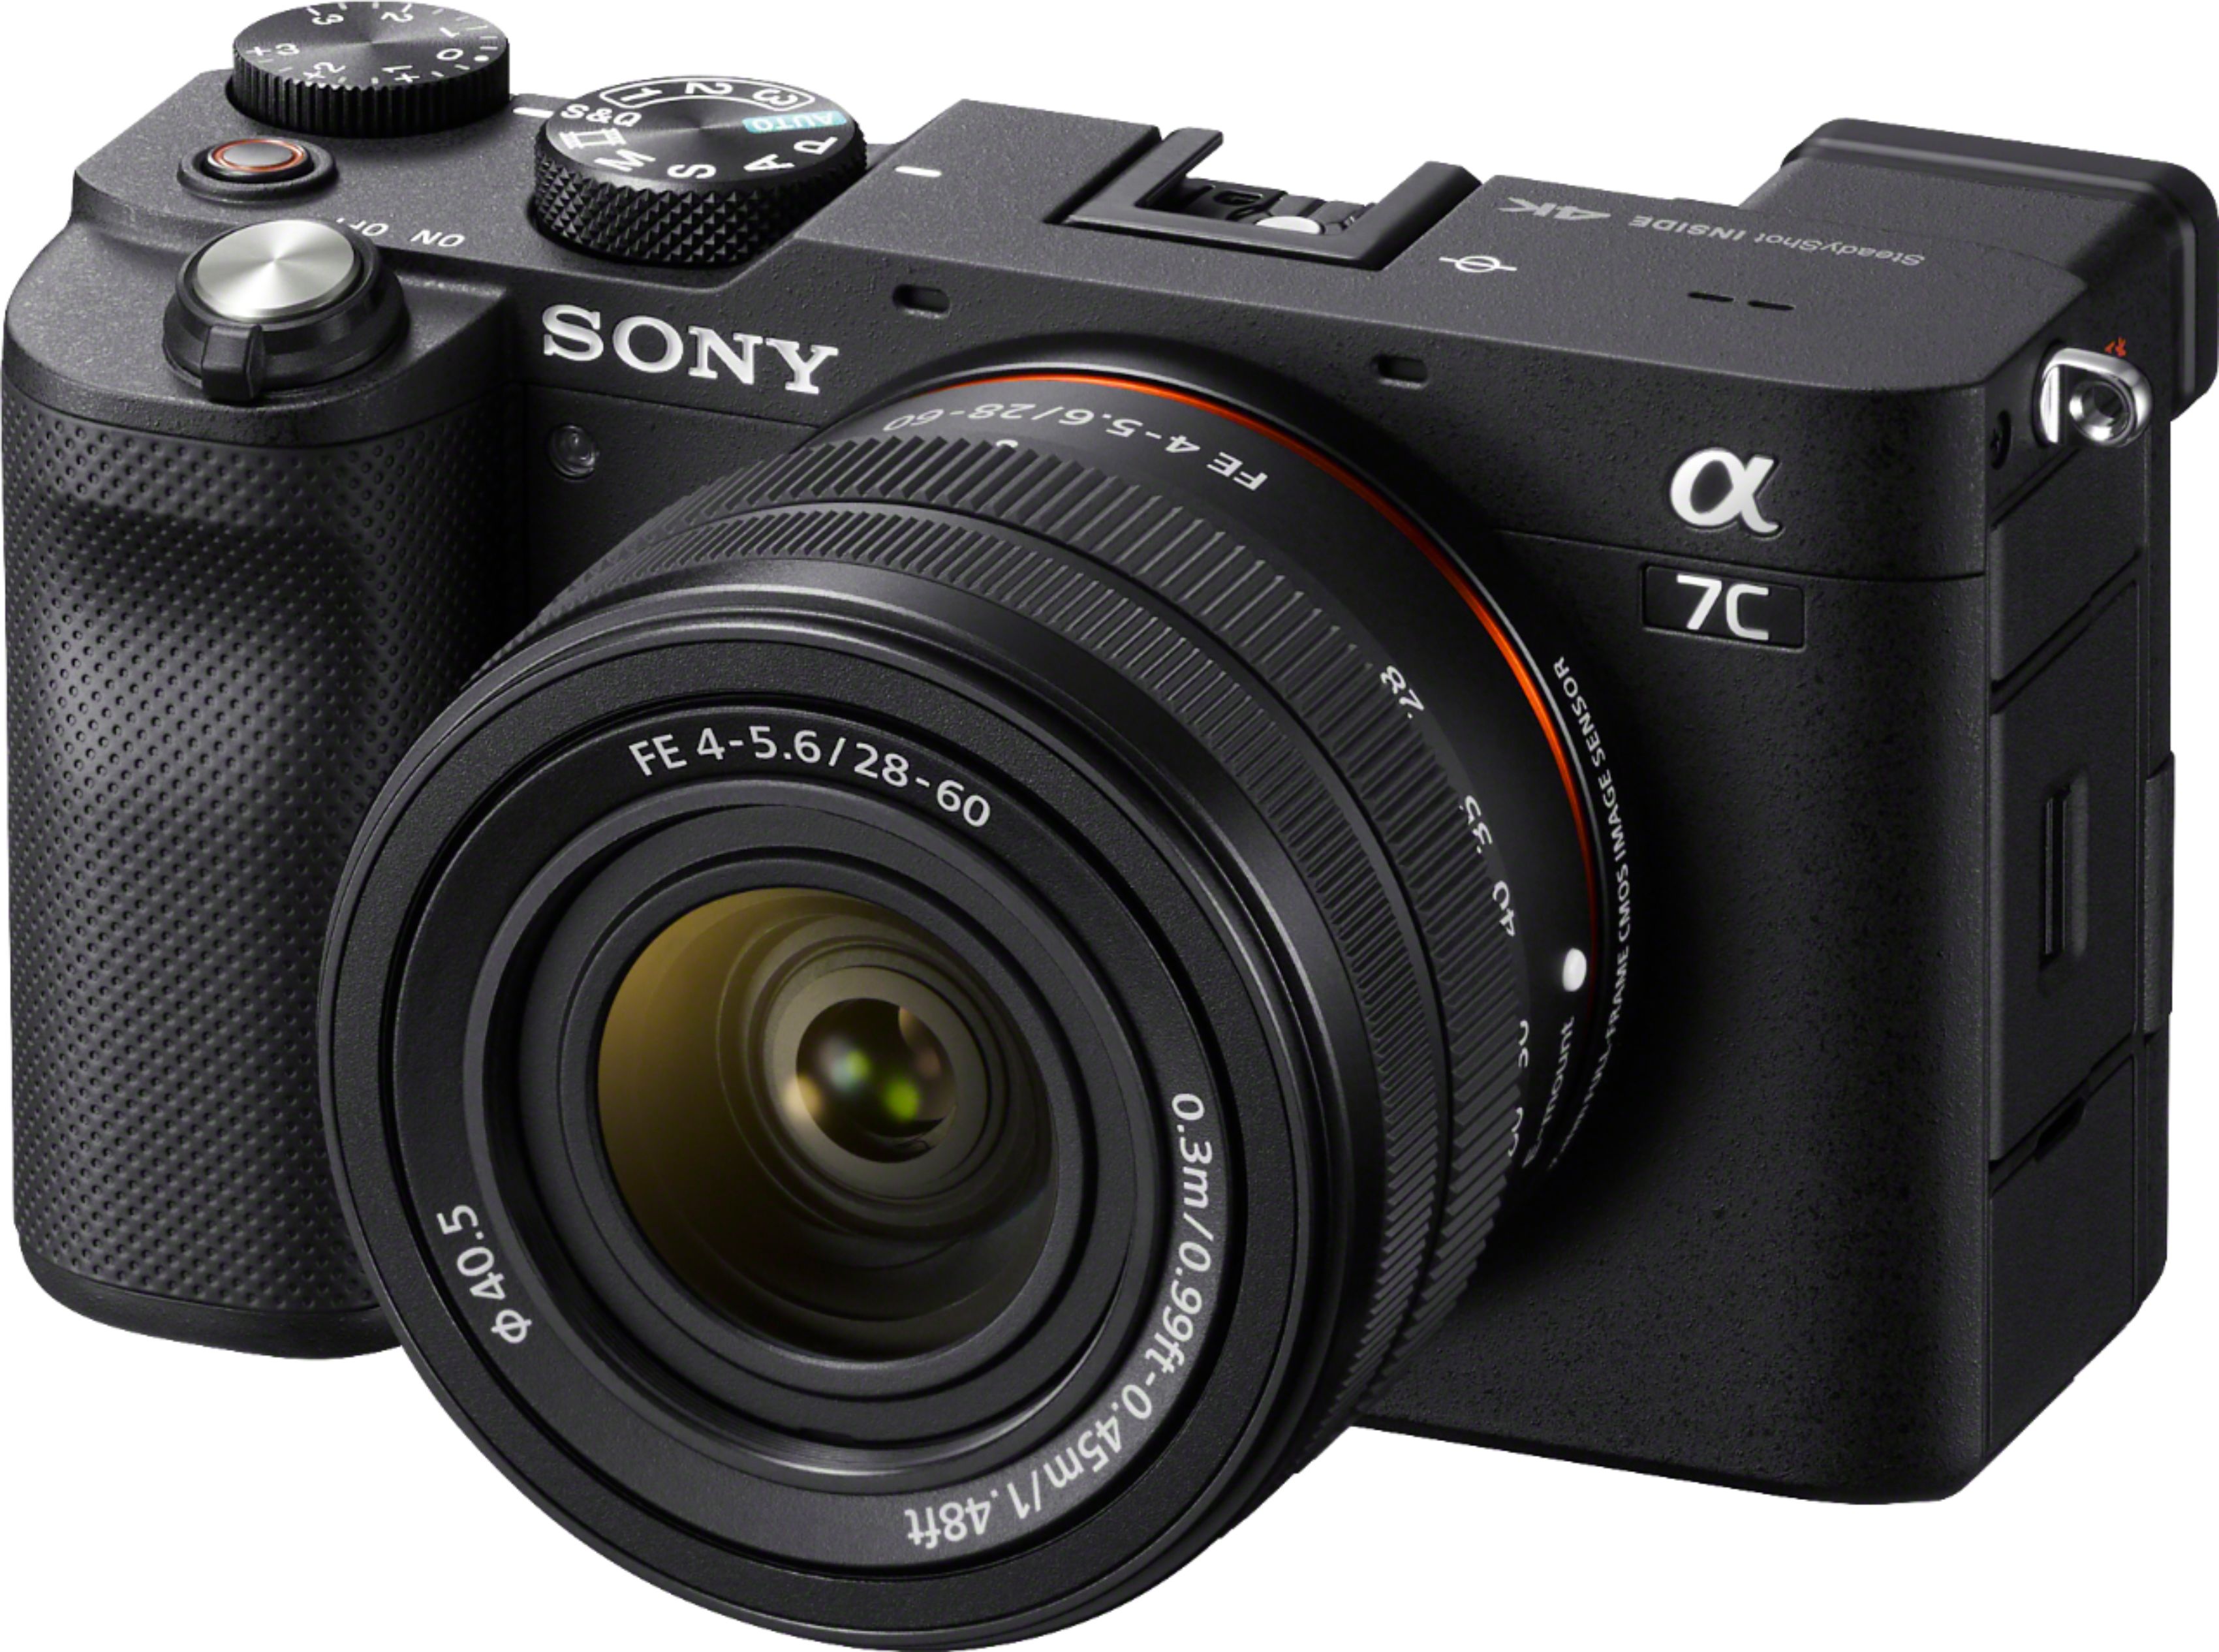 Sony Alpha 7C Full-frame Compact Mirrorless Camera with FE 28-60mm